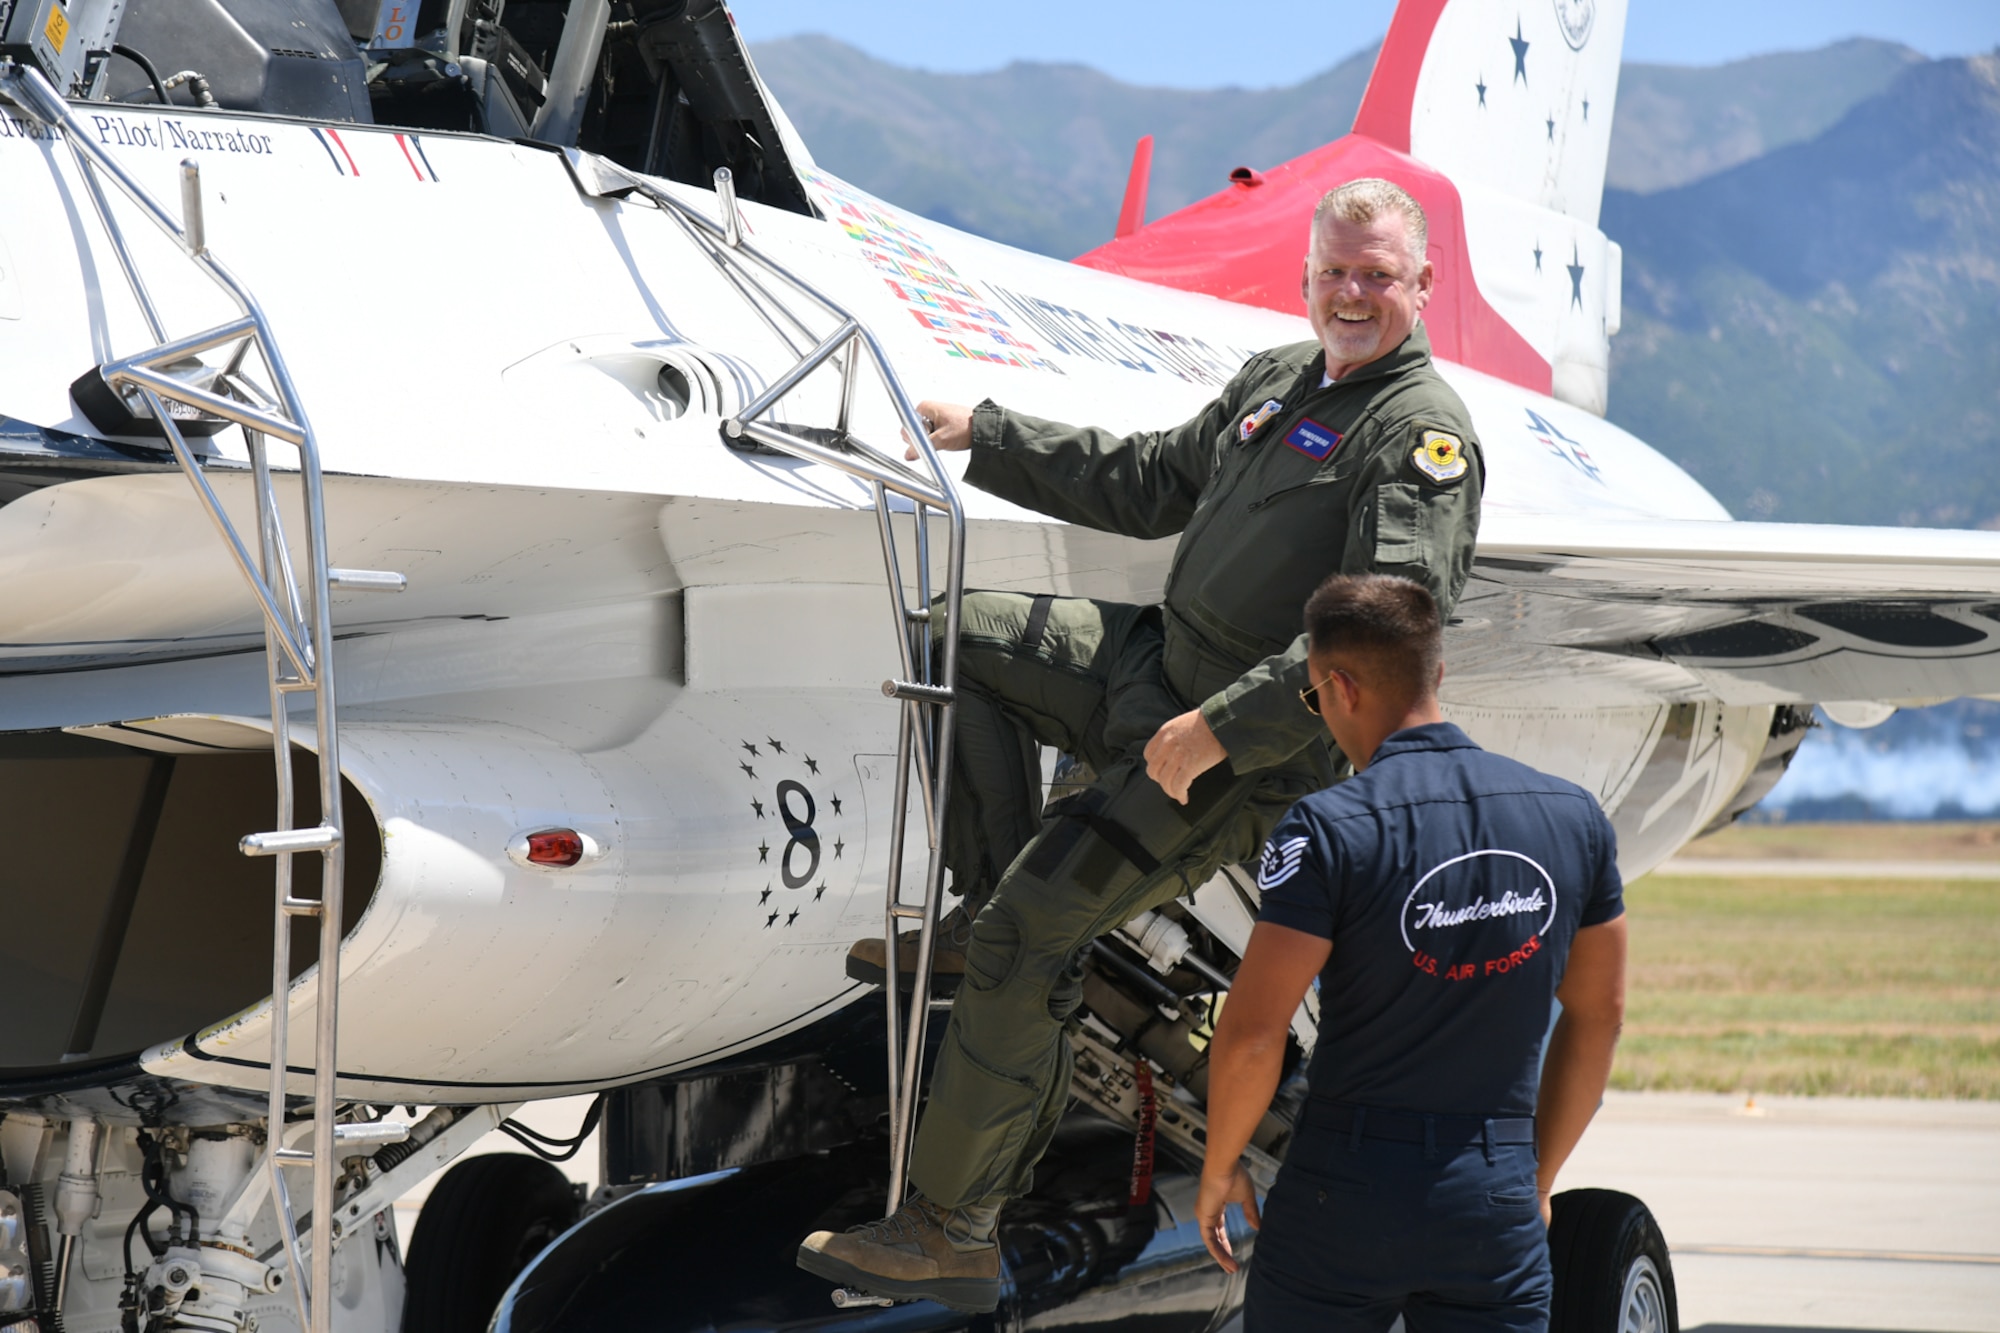 Sergeant Aaron Thompson, Utah Washington County Sheriff, is all smiles upon landing with U.S. Air Force Thunderbirds June 22, 2018, at Hill Air Force Base, Utah. He was selected to fly with the Thunderbirds as part of their Hometown Hero program. (U.S. Air Force photo by Cynthia Griggs)